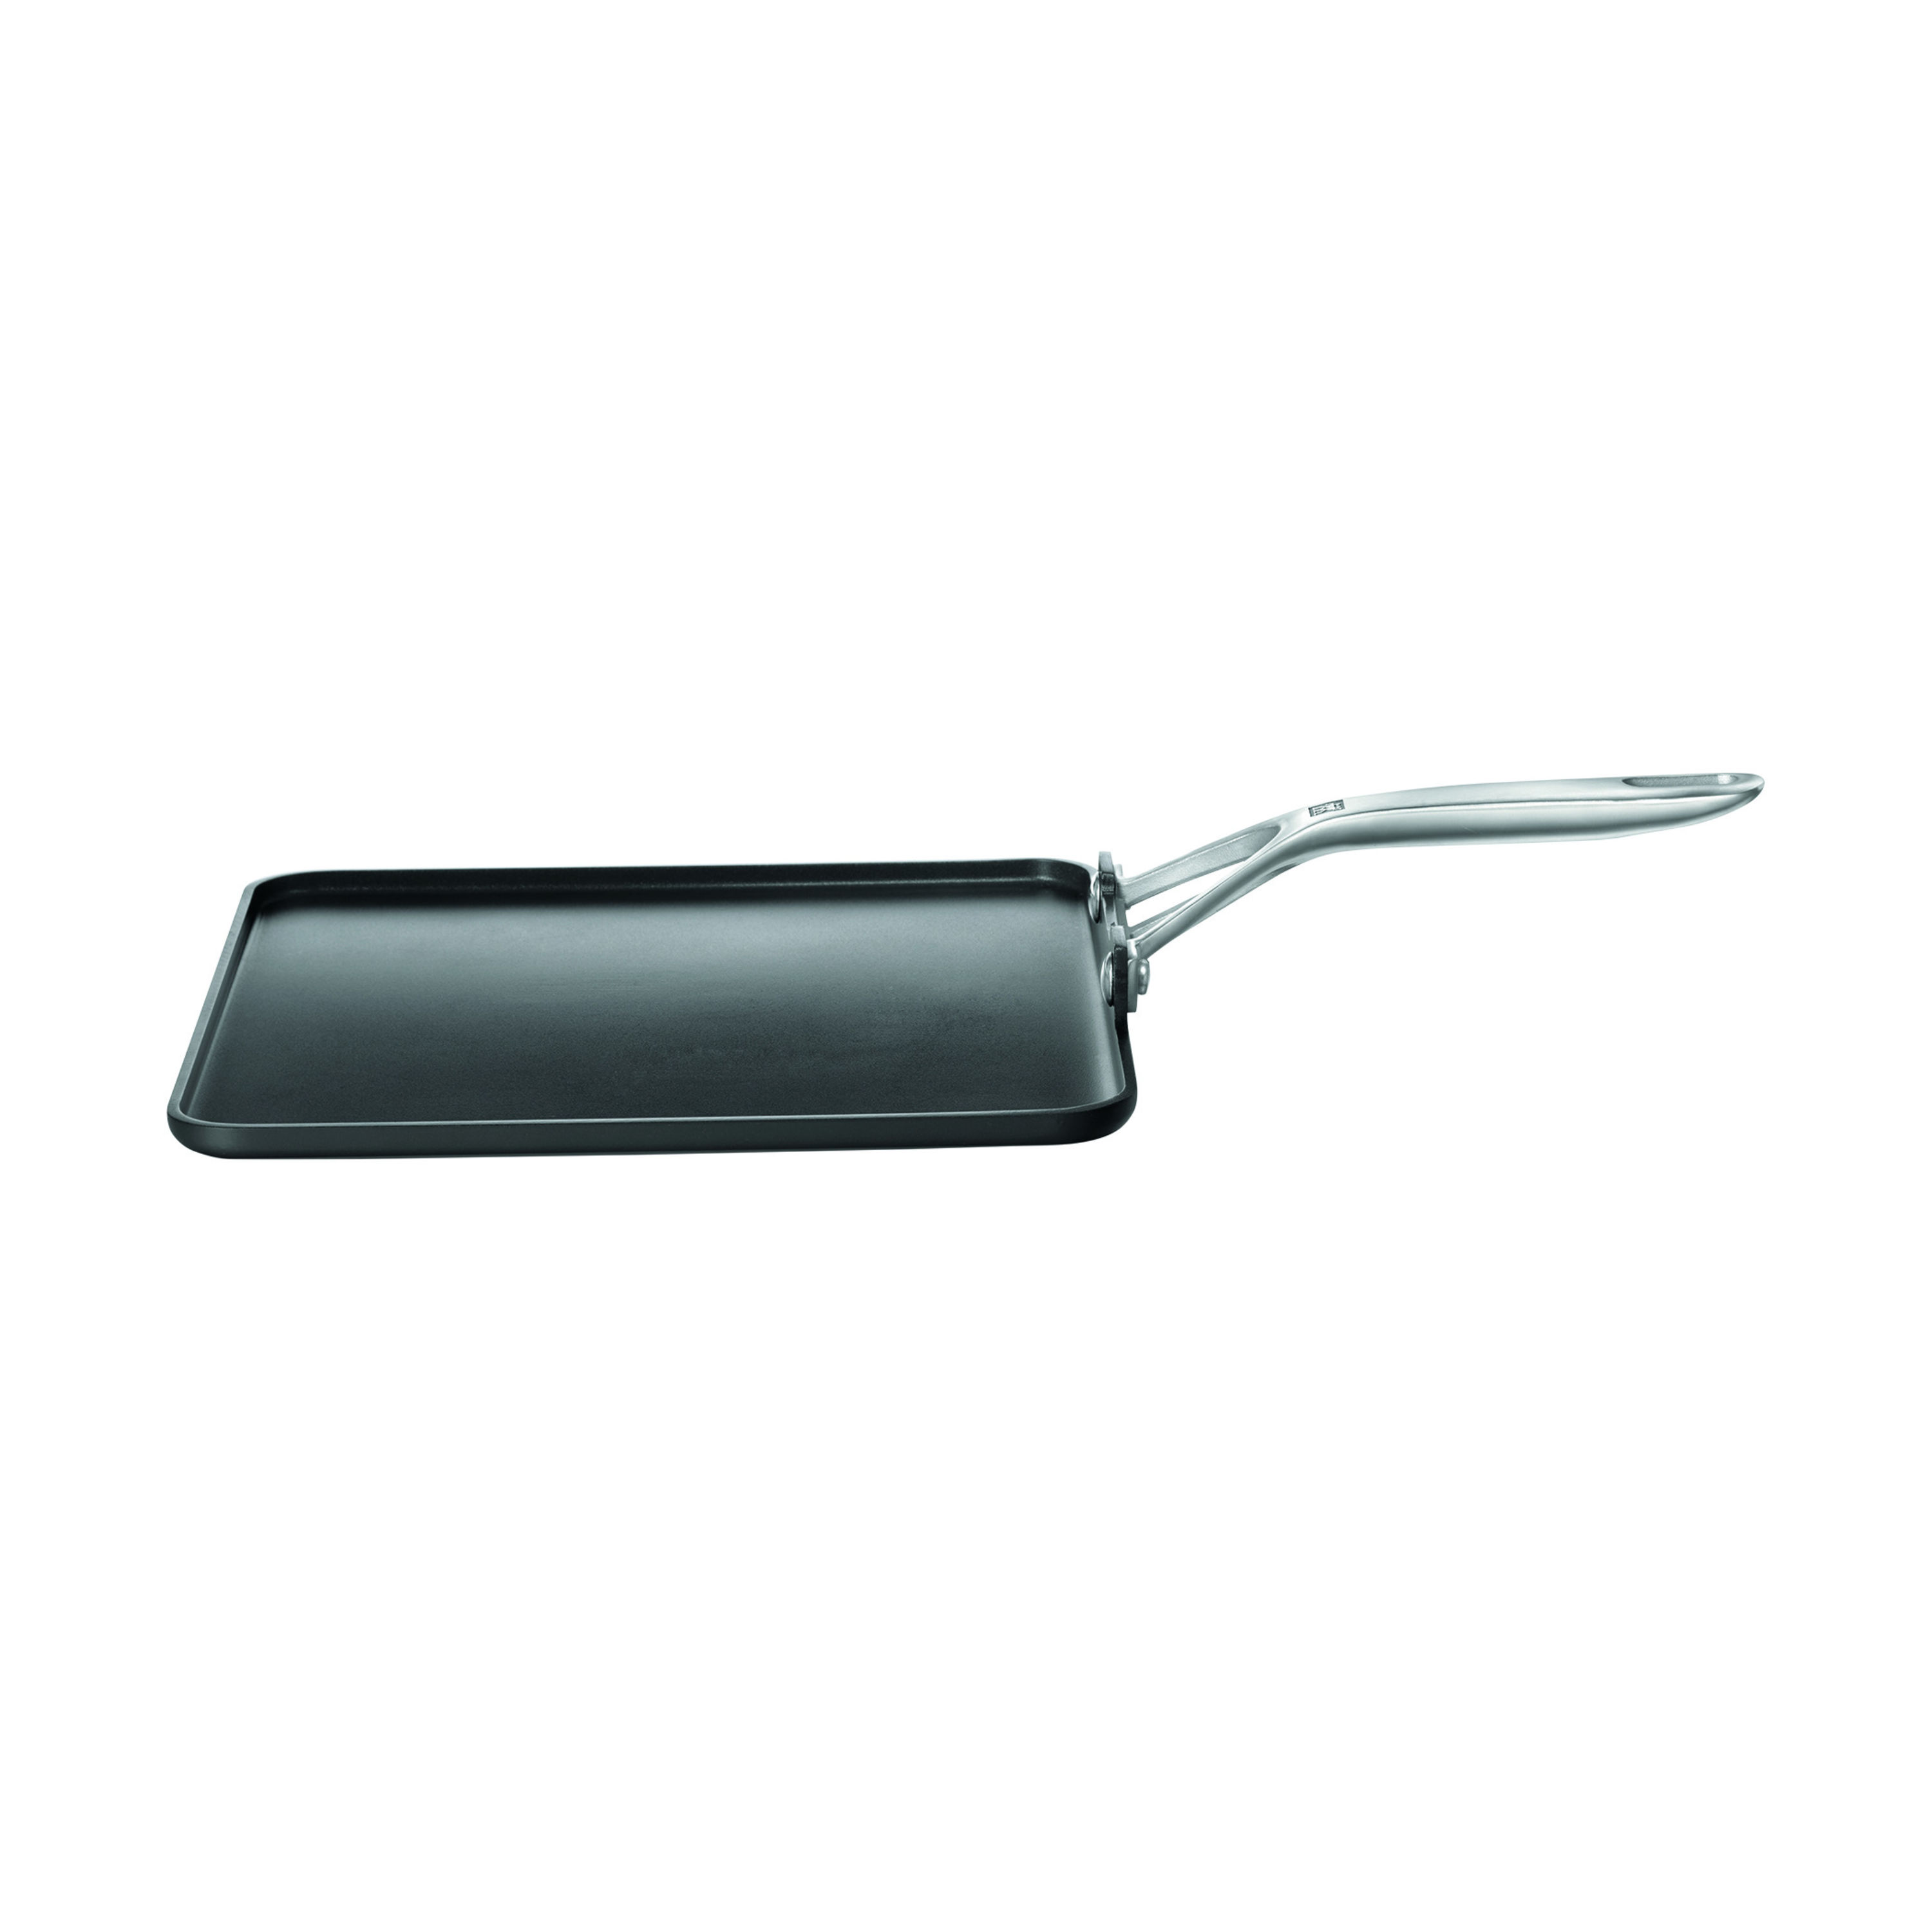 Cooks Standard Hard Anodized Nonstick Square Griddle Pan, 11 x 11